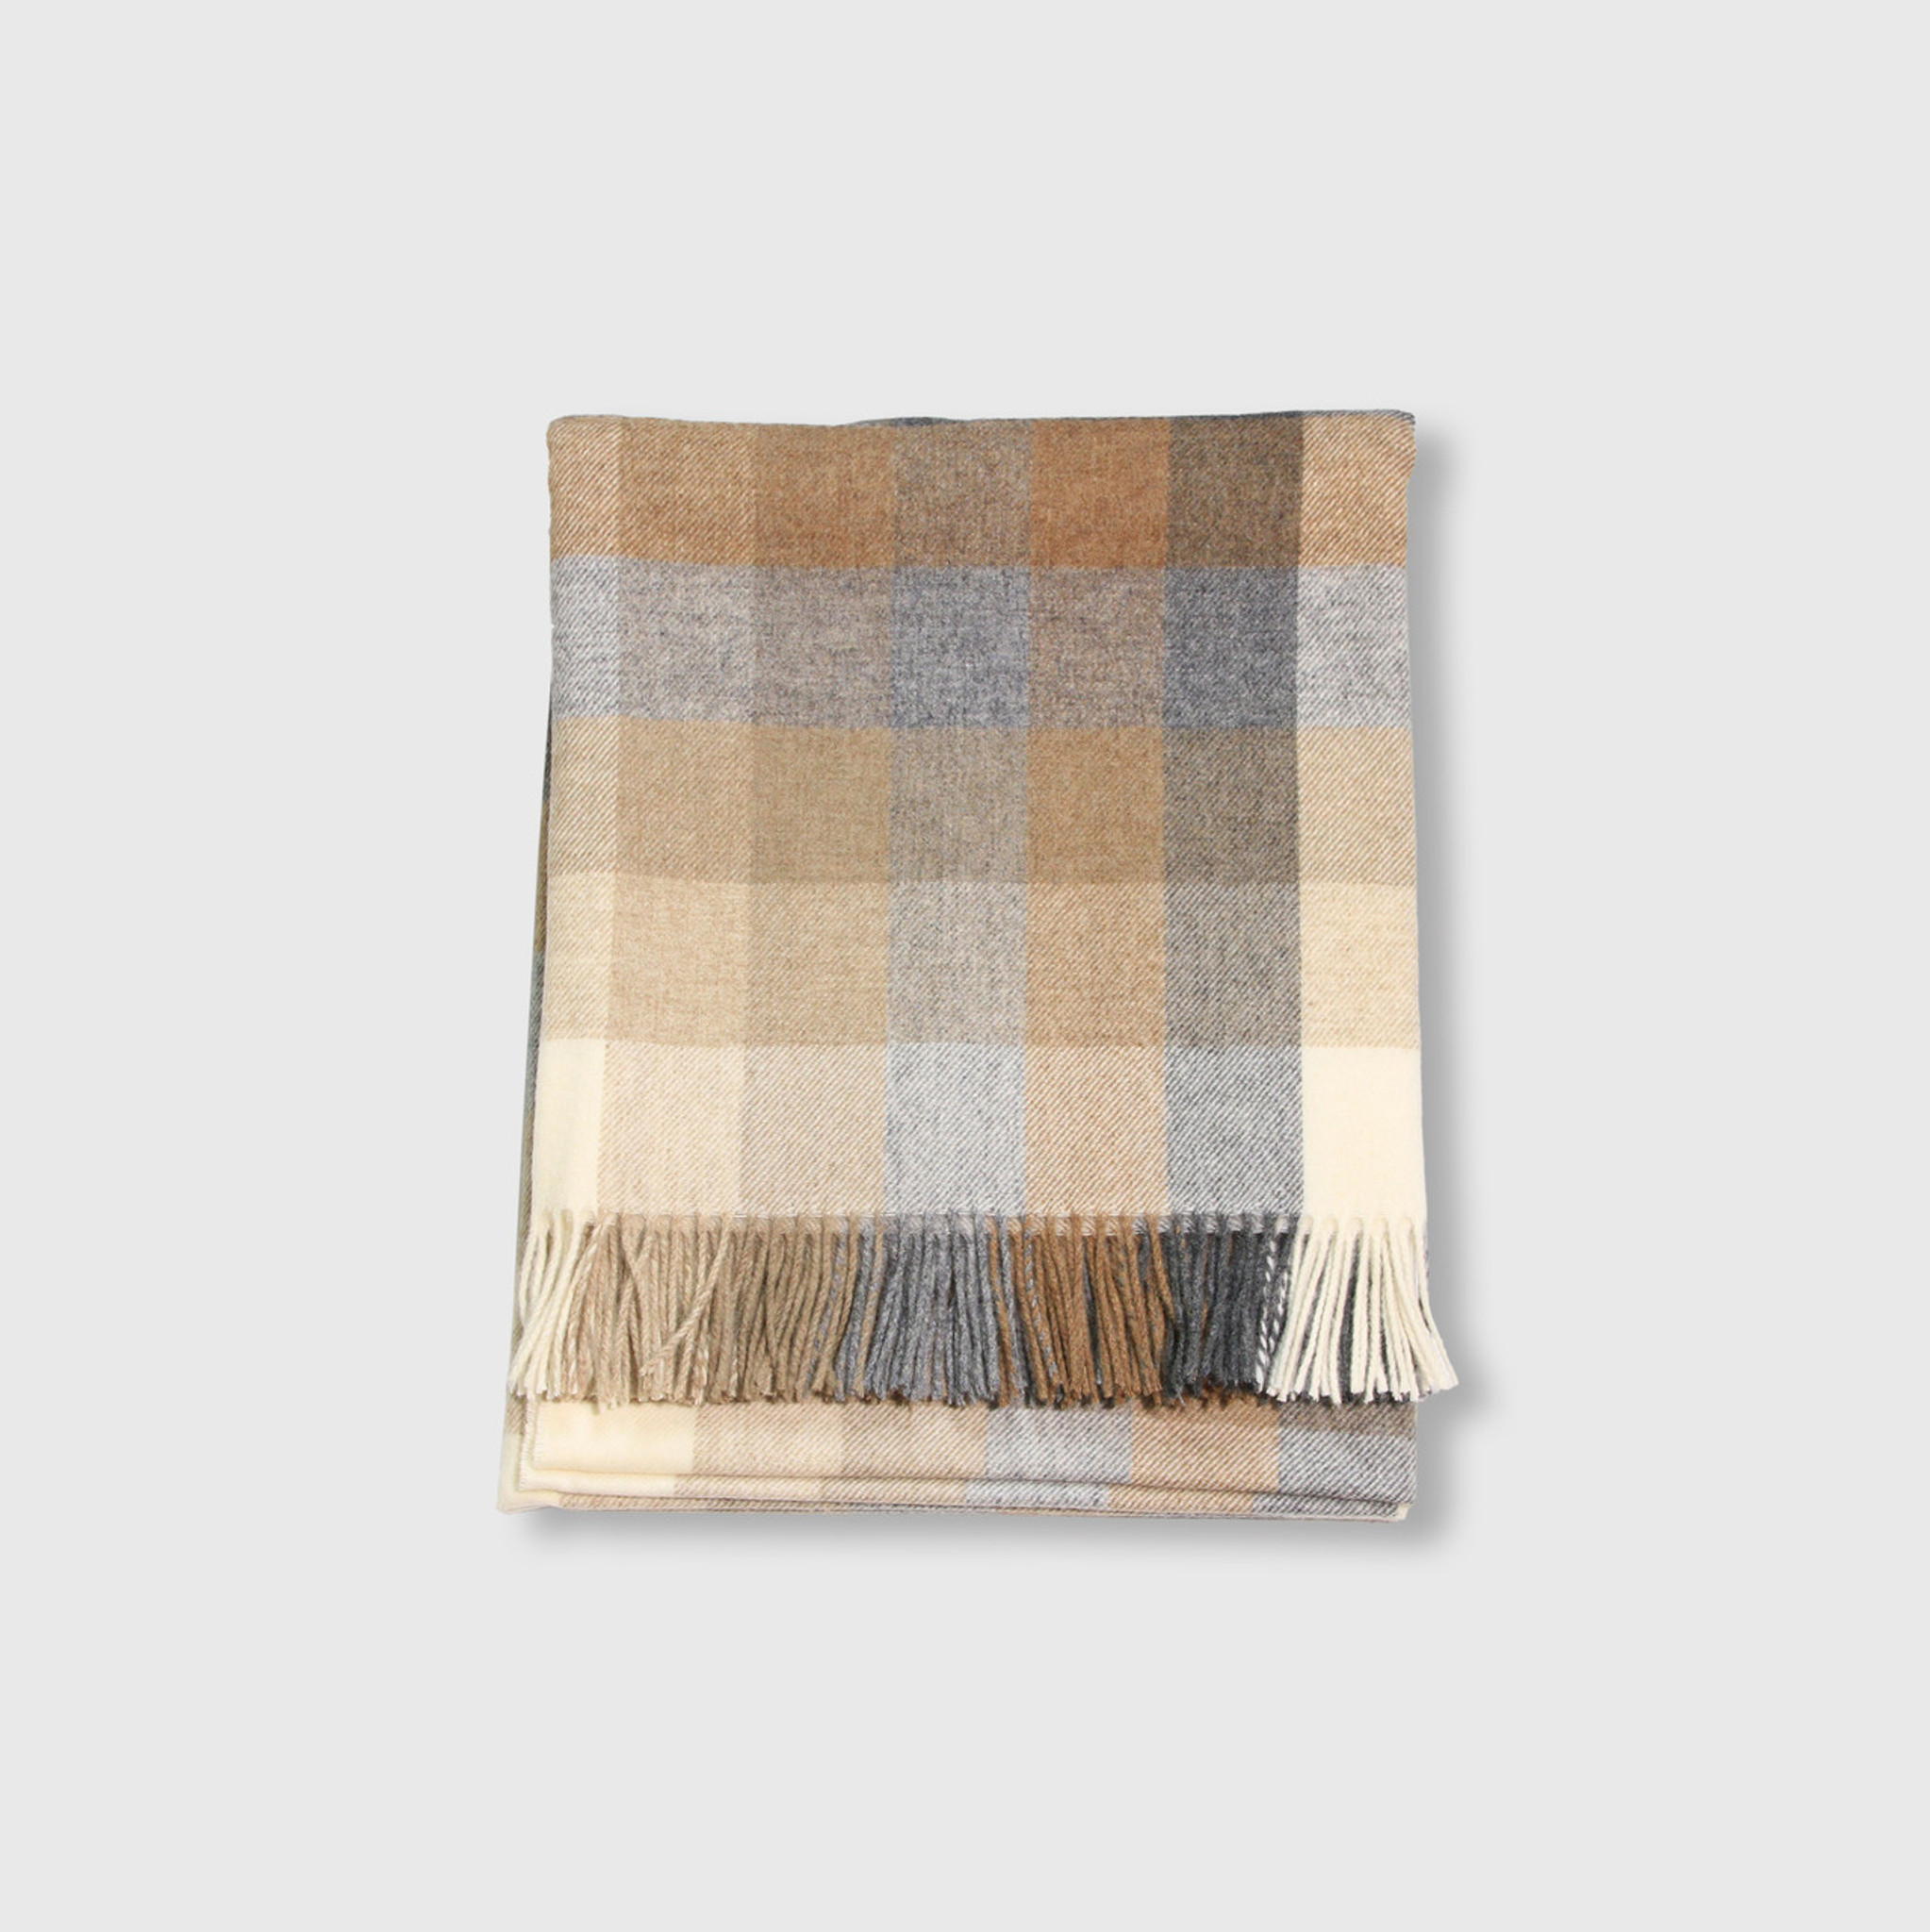 Bronte Moon Natural Merino Lambswool Throws, in Harlequin Natural, Made in England 